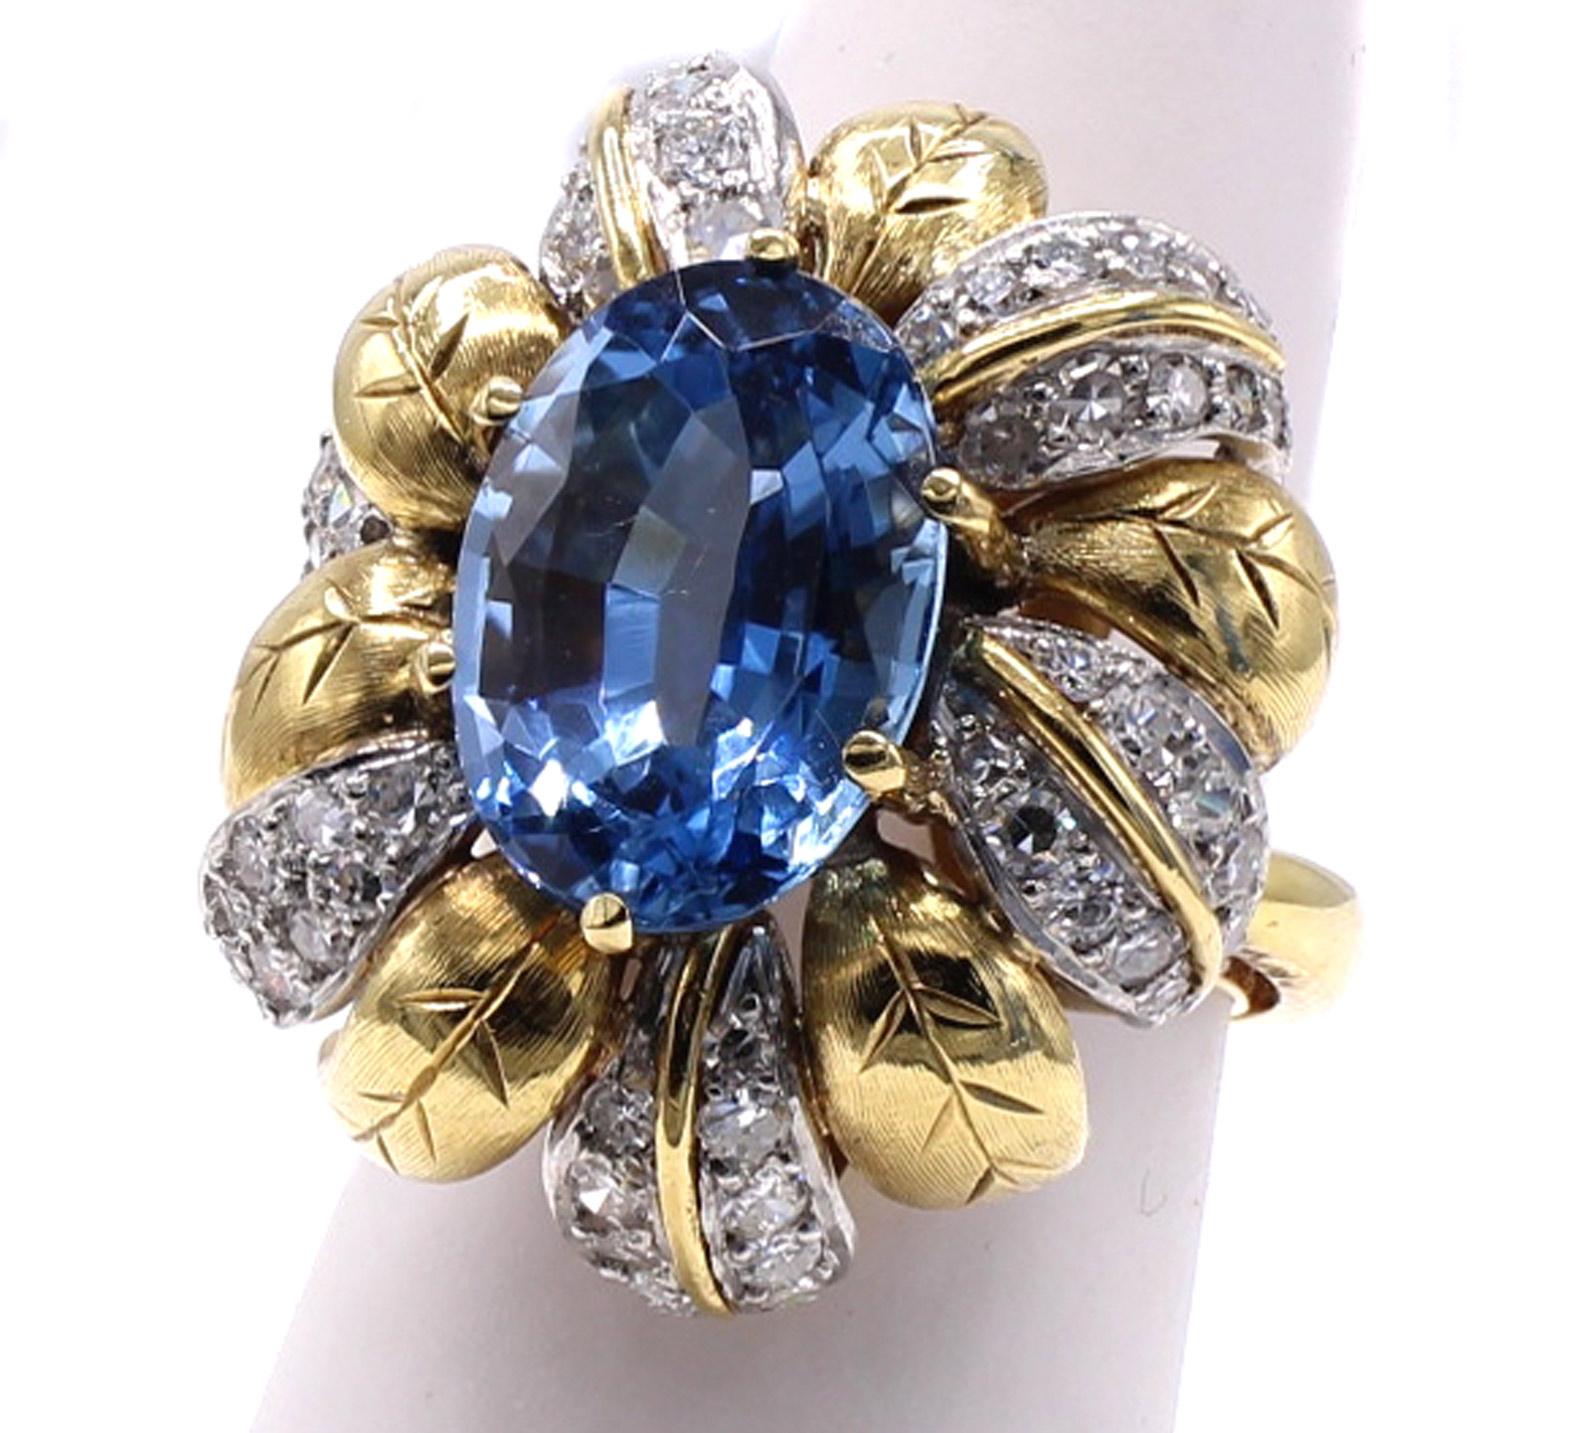 The centerpiece of this beautifully designed and masterfully handcrafted 1980s ring is a gem oval cut aquamarine weighing 5.11 carats. The intense blue of this aquamarine would have only been found in the famous Santa Maria mine in Brazil. The